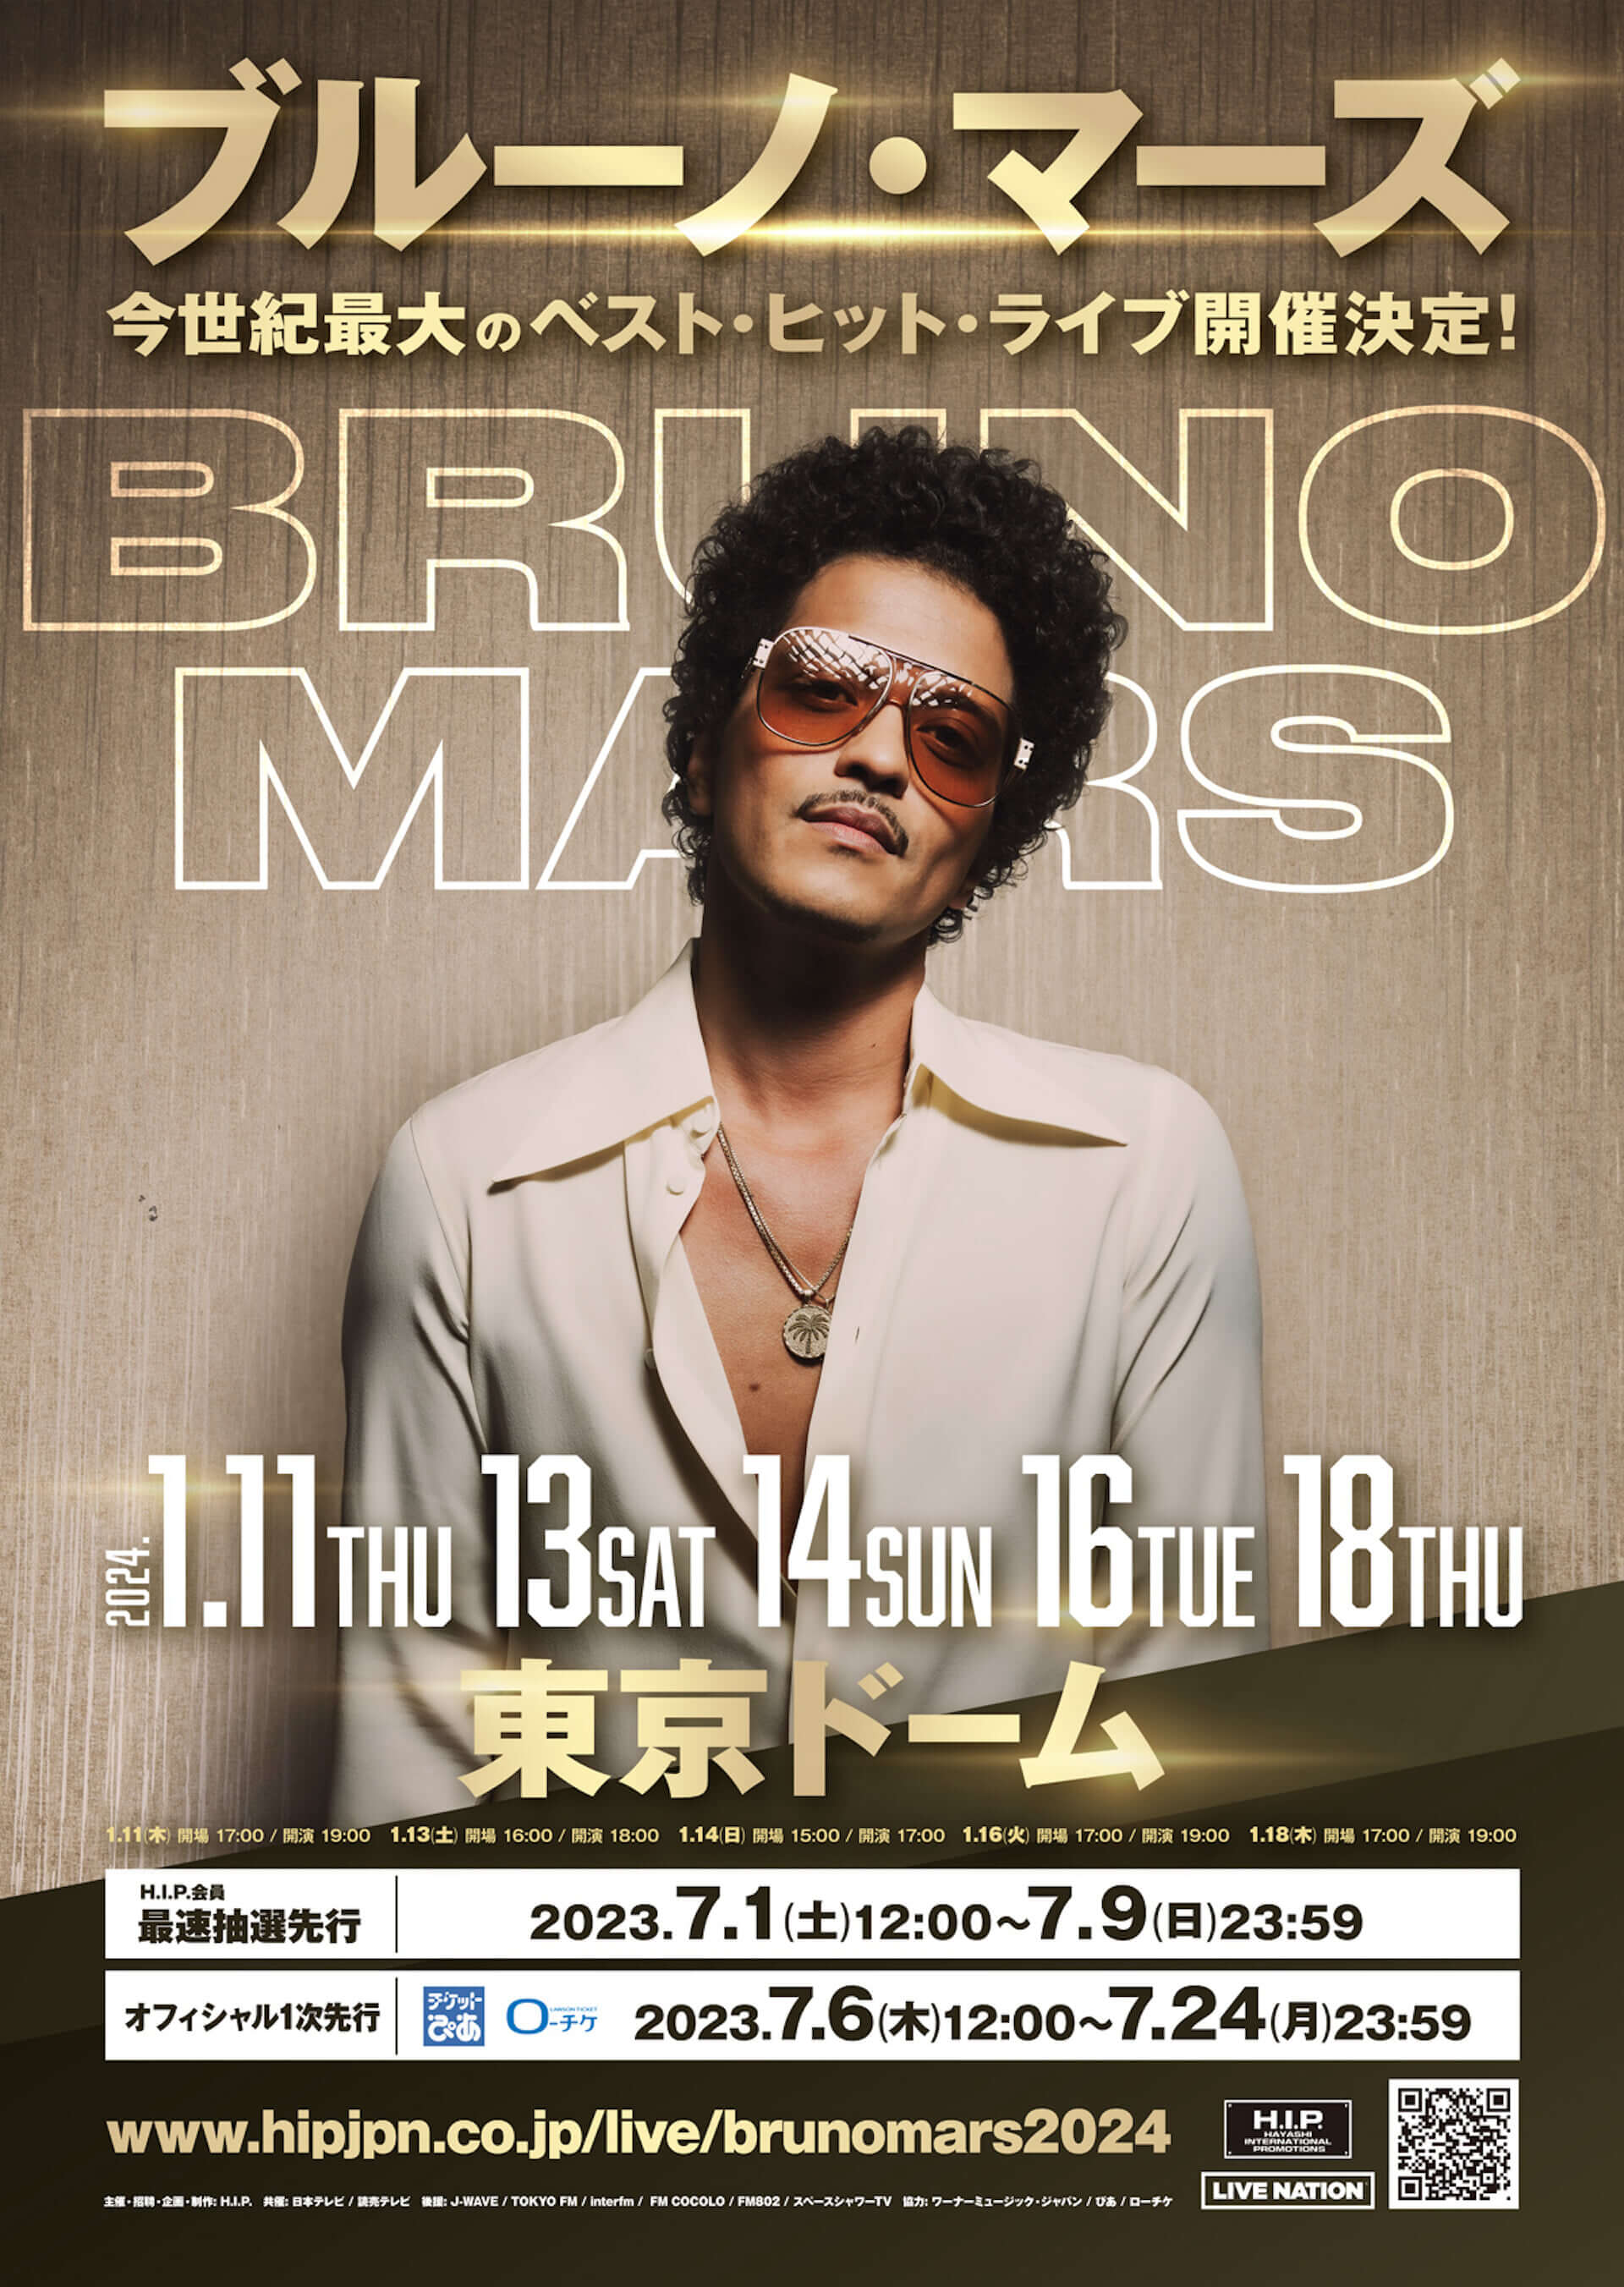 Best of Bruno Mars Live at Tokyo Dome